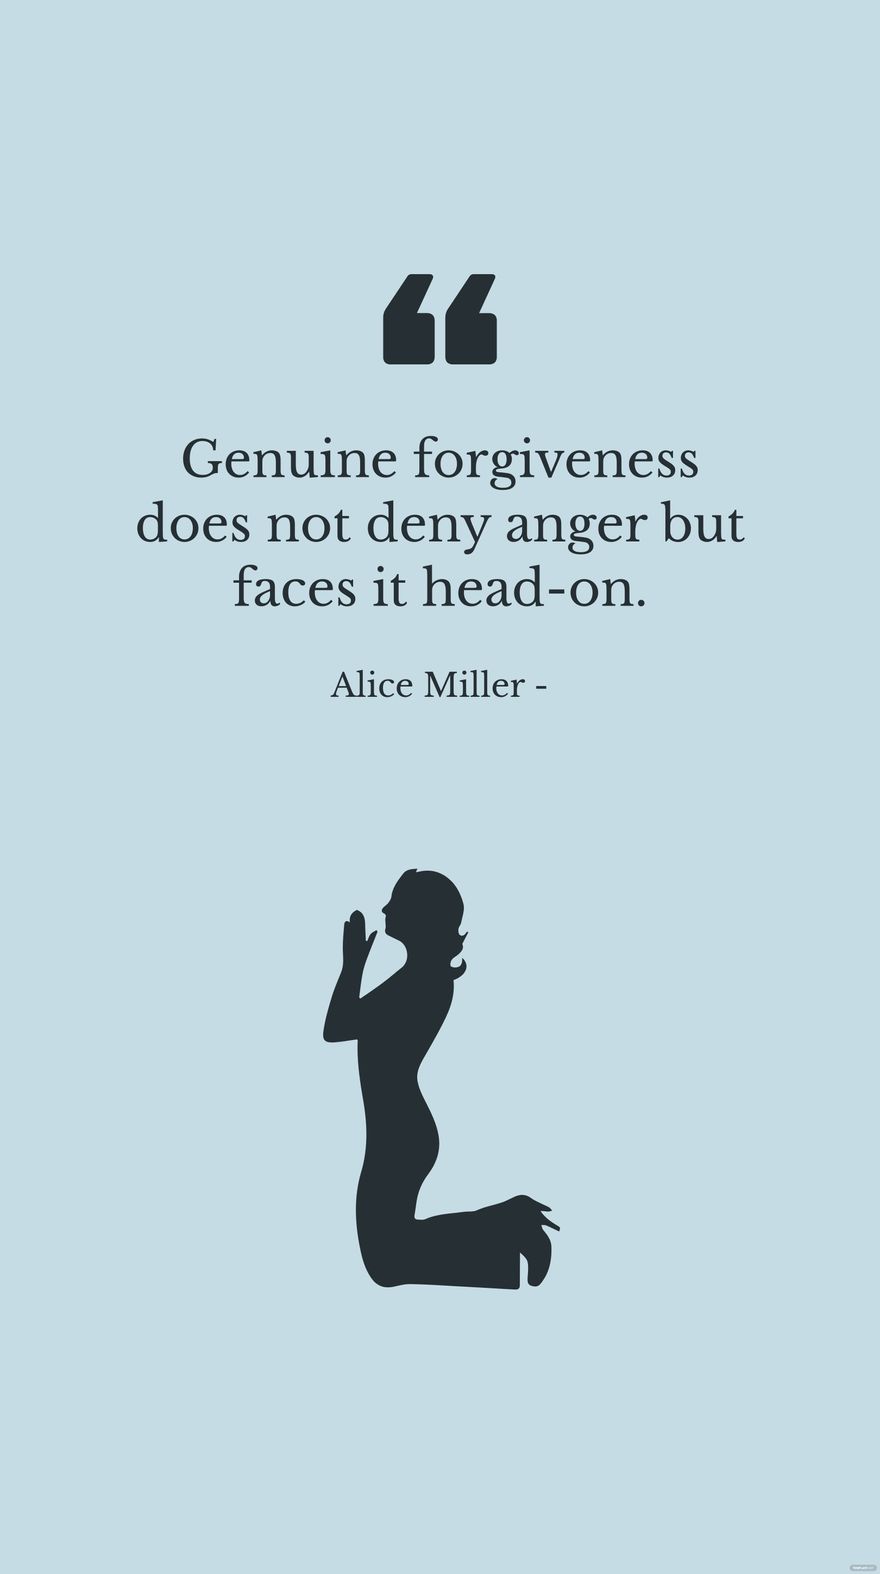 Free Alice Miller - Genuine forgiveness does not deny anger but faces it head-on. in JPG